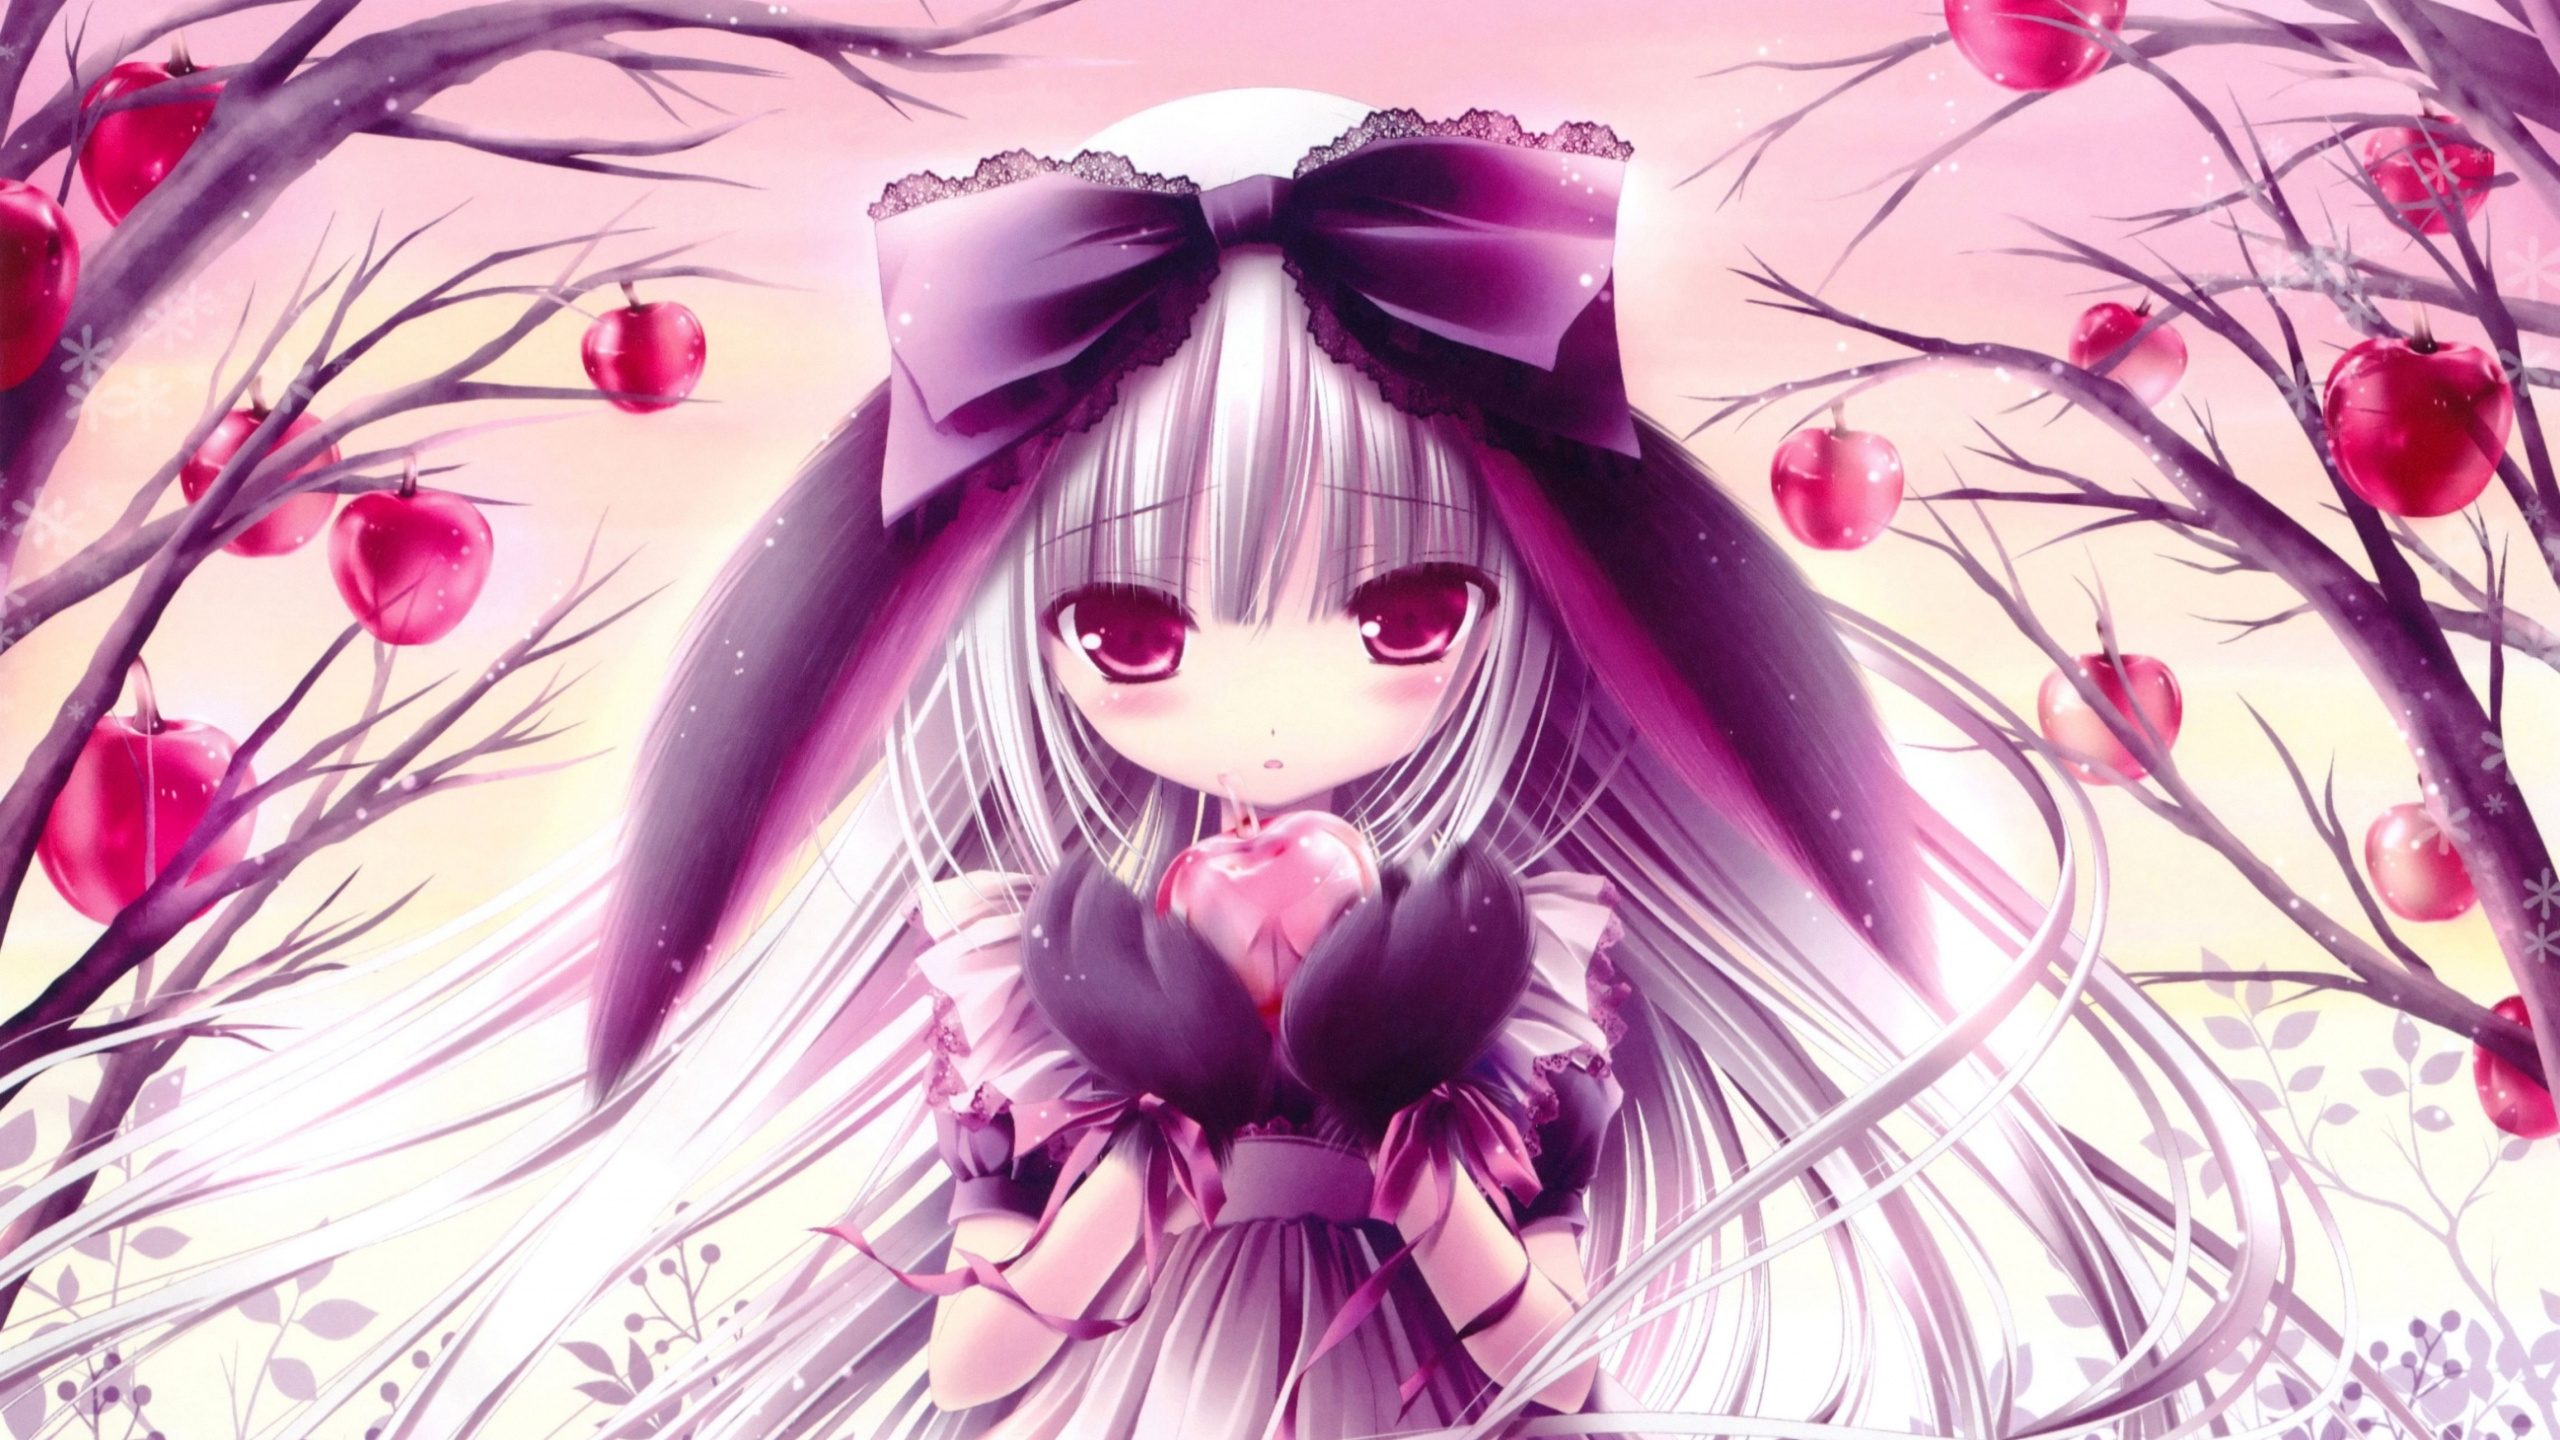 Personnage D'anime Fille Aux Cheveux Violets. Wallpaper in 2560x1440 Resolution